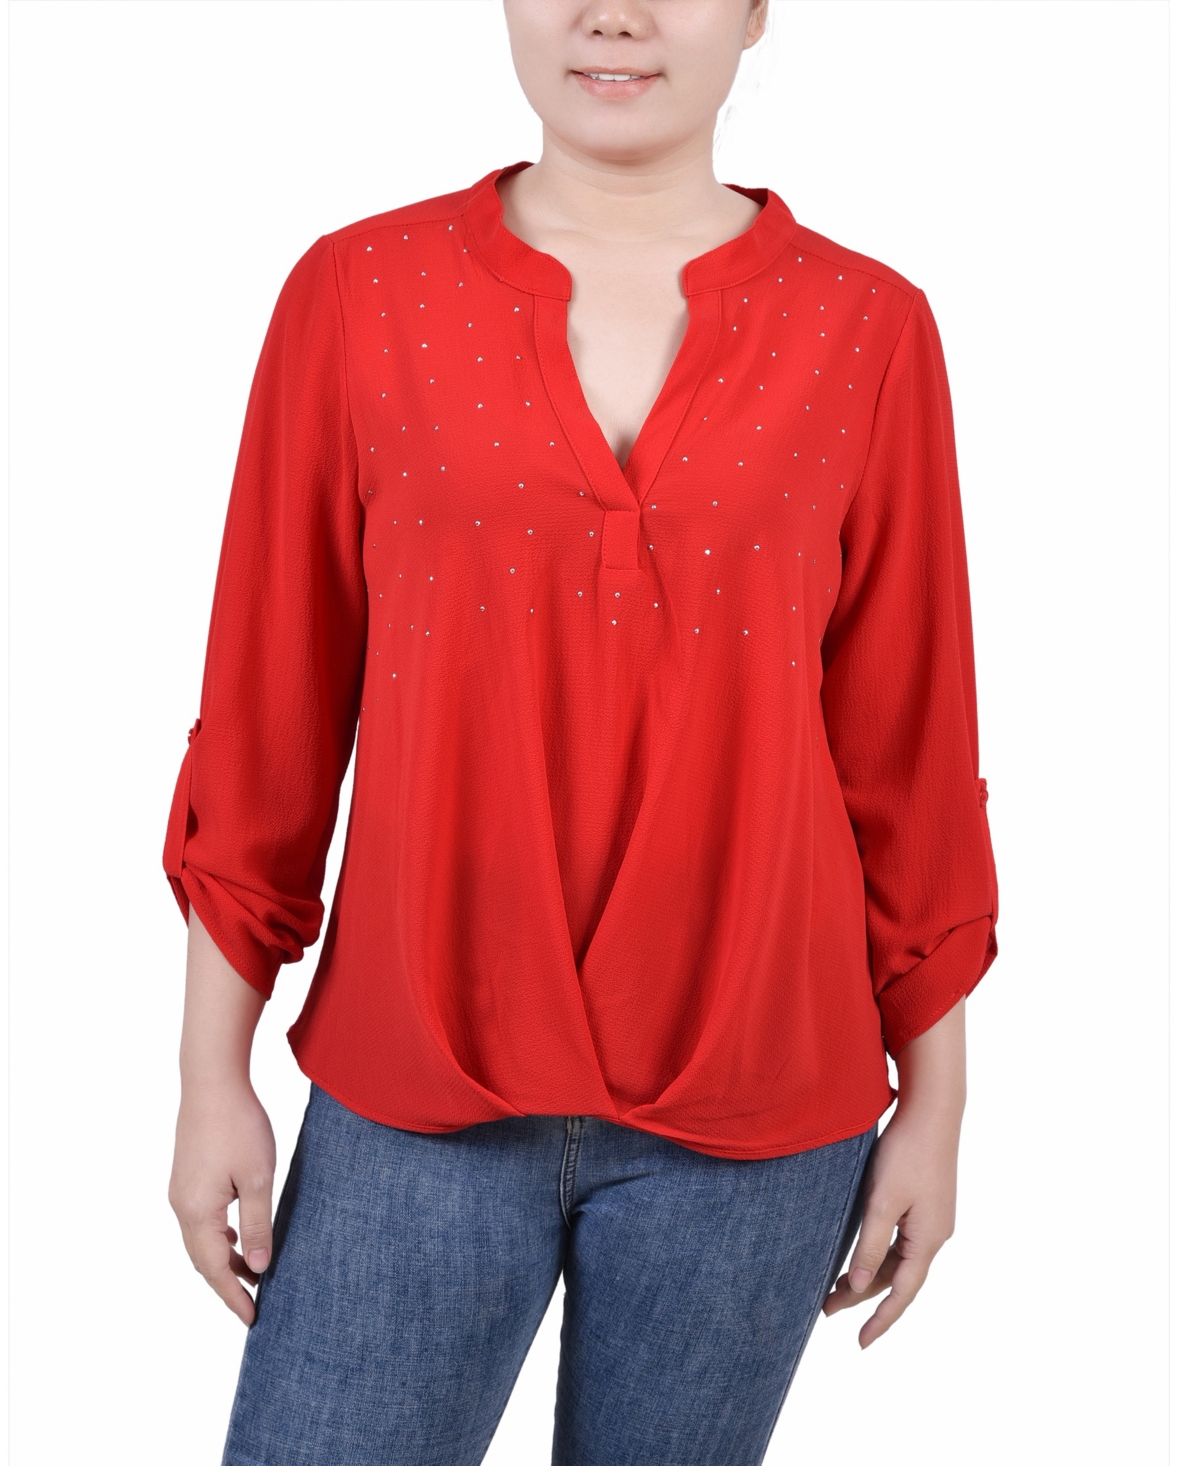 Petite 3/4 Sleeve Mandarin Collar Blouse with Front Pleats - Molten Lava Red